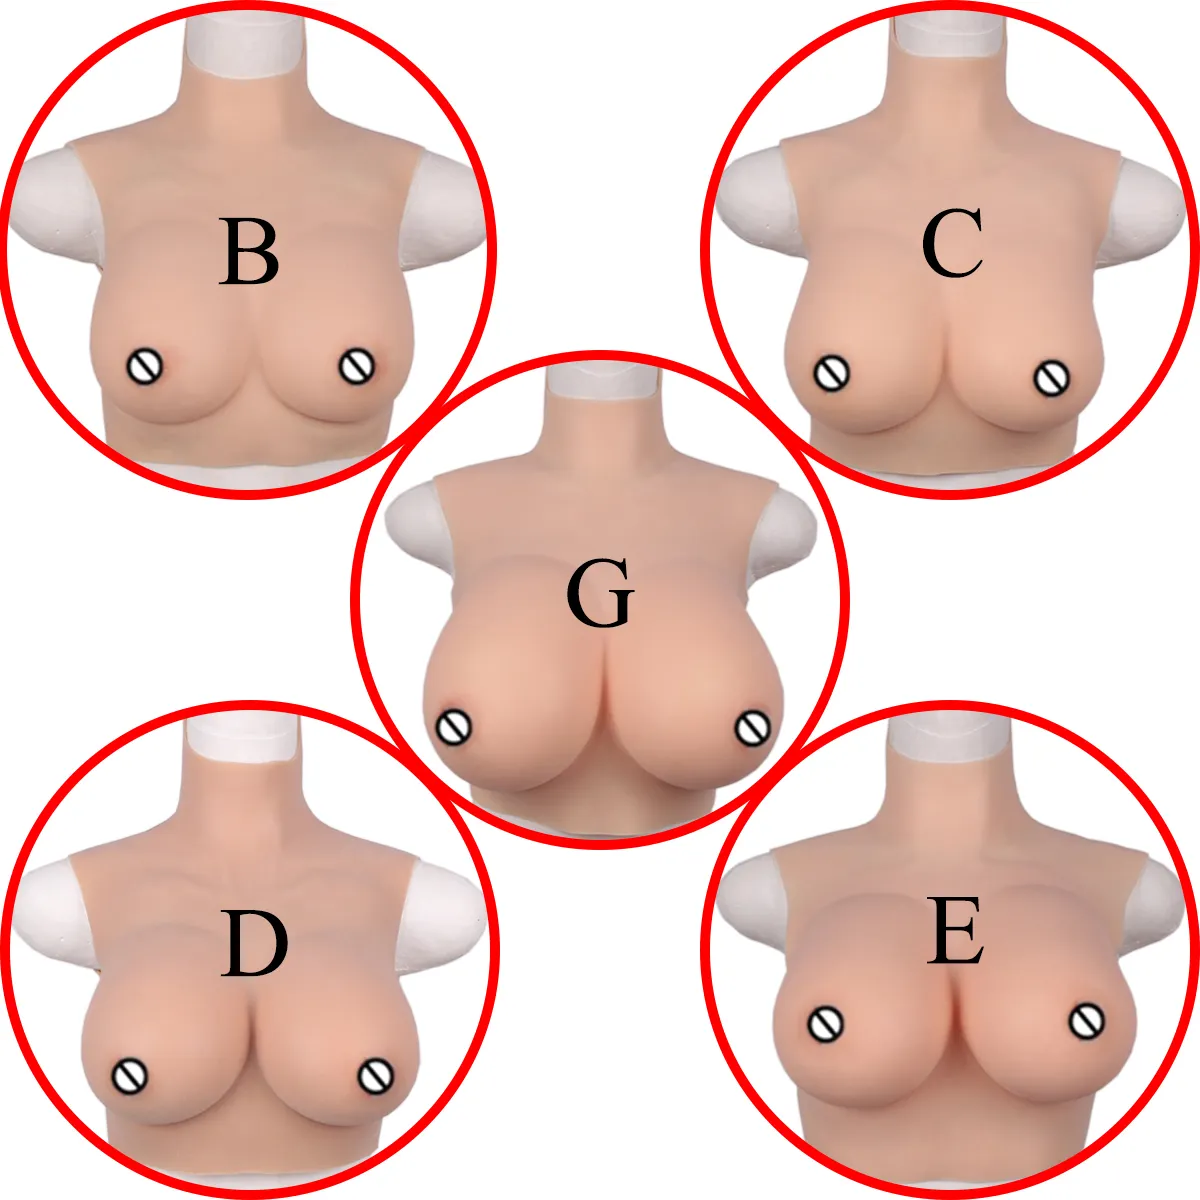 Factory huge silicon boobs brown transgender cheap artificial men for crossdresser realistic large silicone breast forms